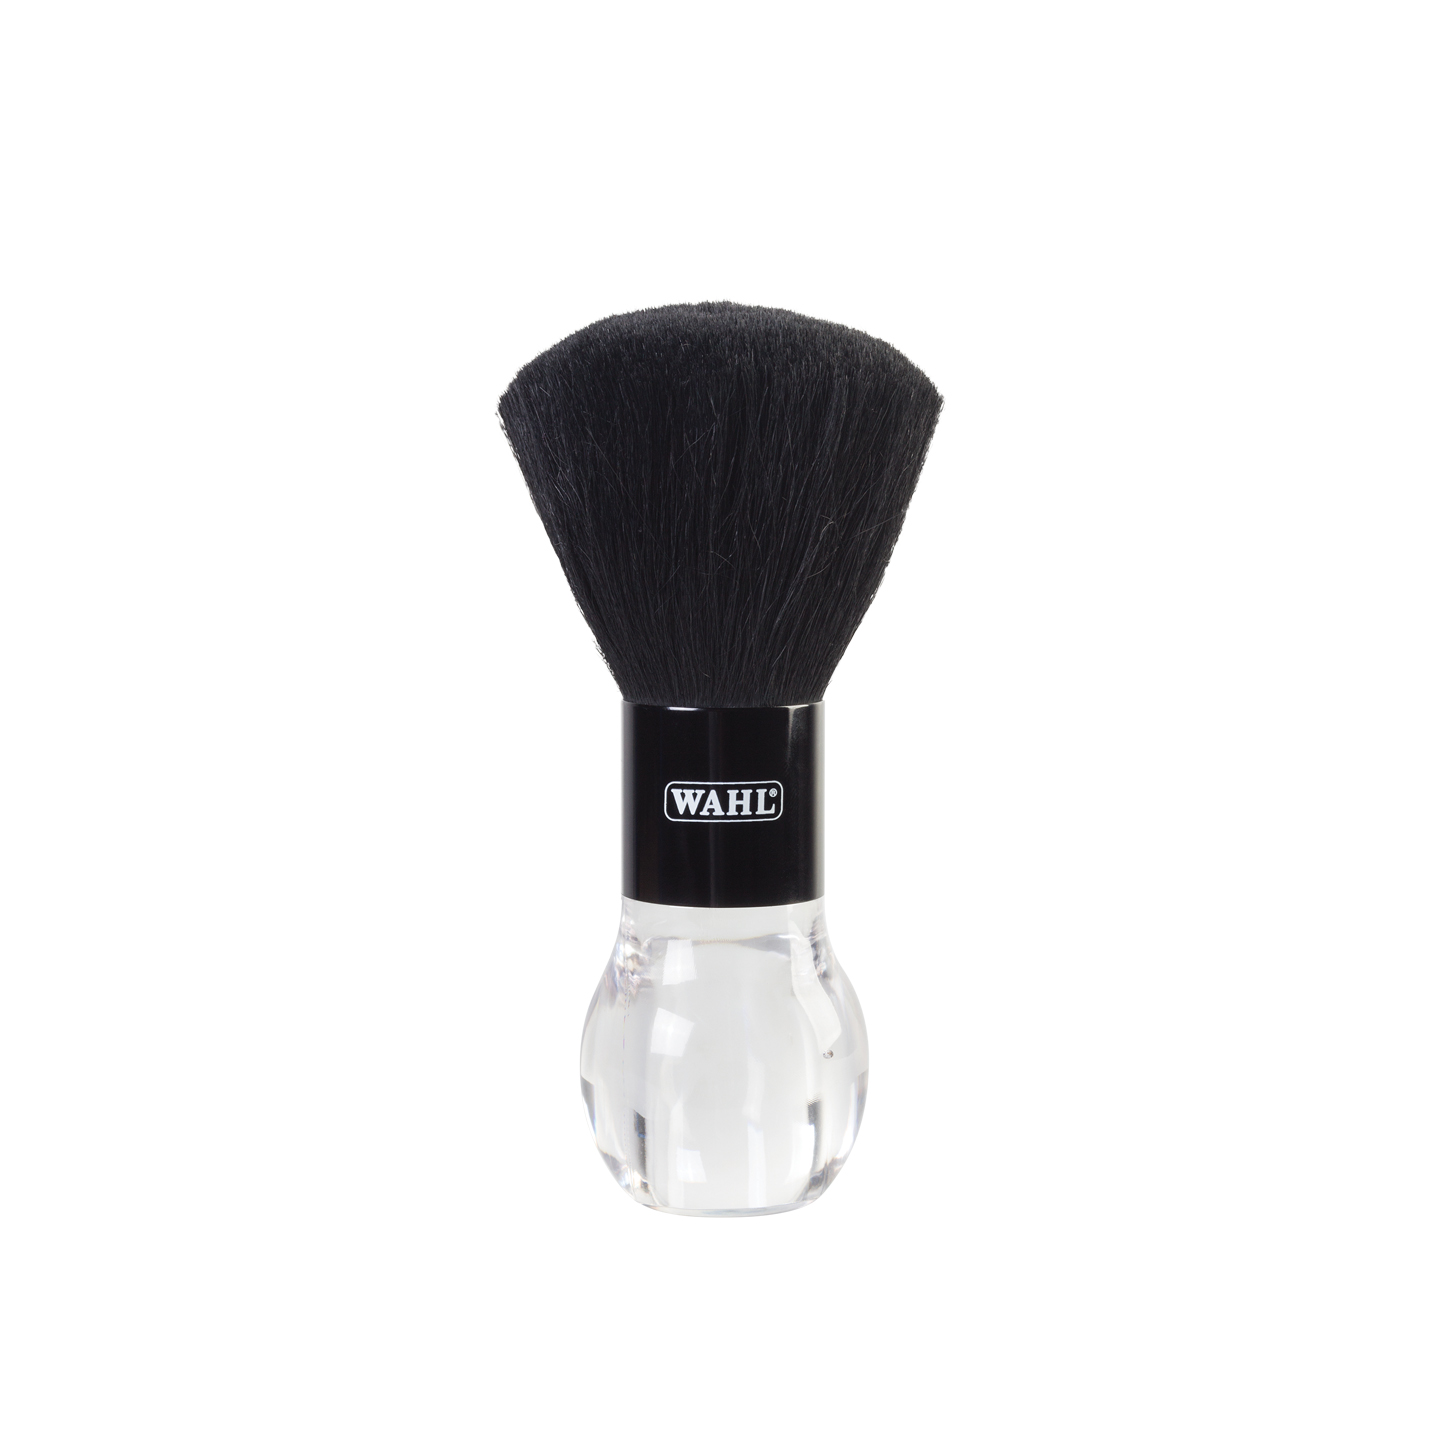 Blive kold by klipning Wahl Hair Neck Brush | Barbers Hairdressers tools